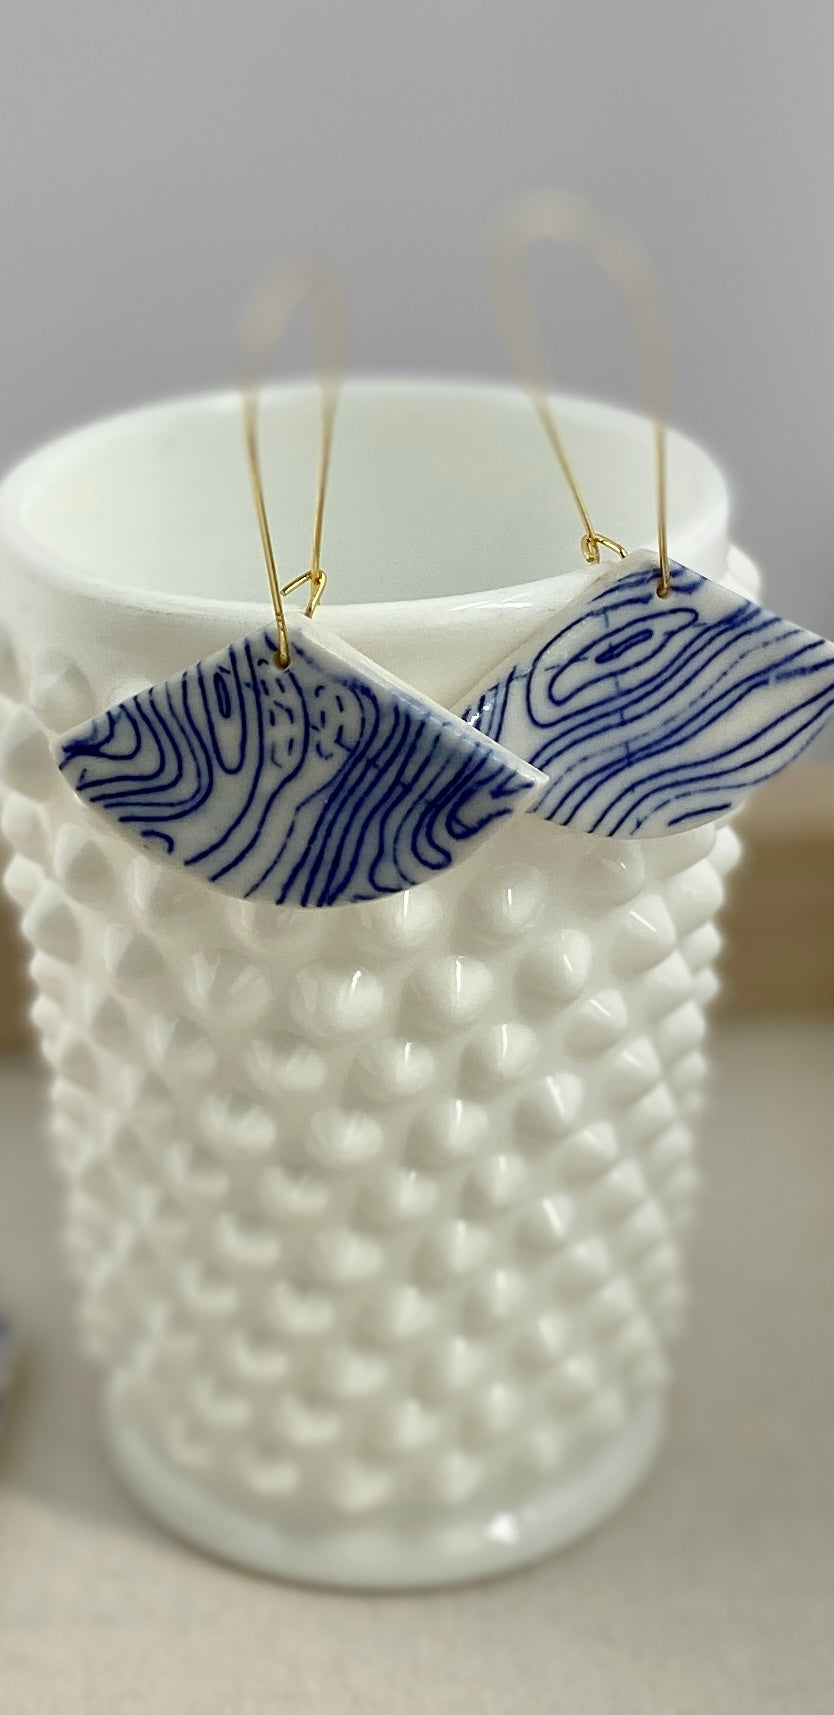 Porcelain geometric Blue and White Fan shaped hanging earring. "Topographic"